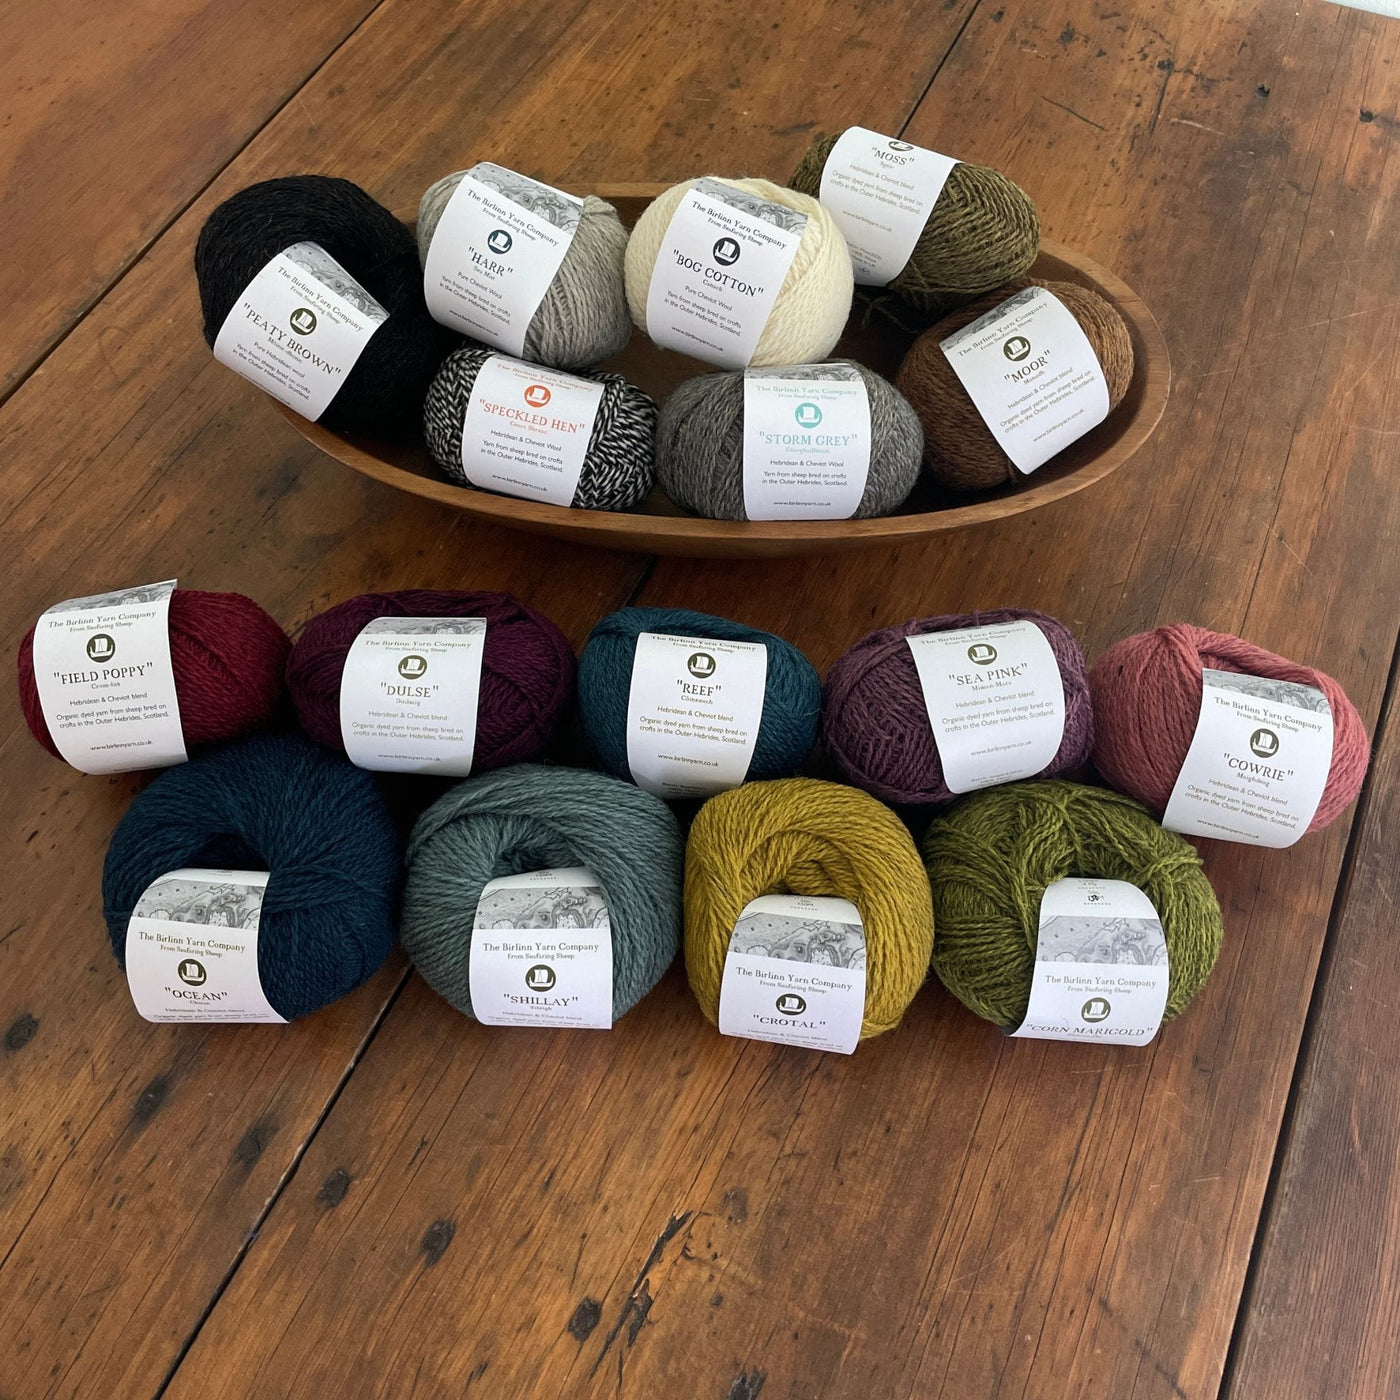 Birlinn Yarn Company Hebridean 4ply yarns shown in various colors on wooden table.